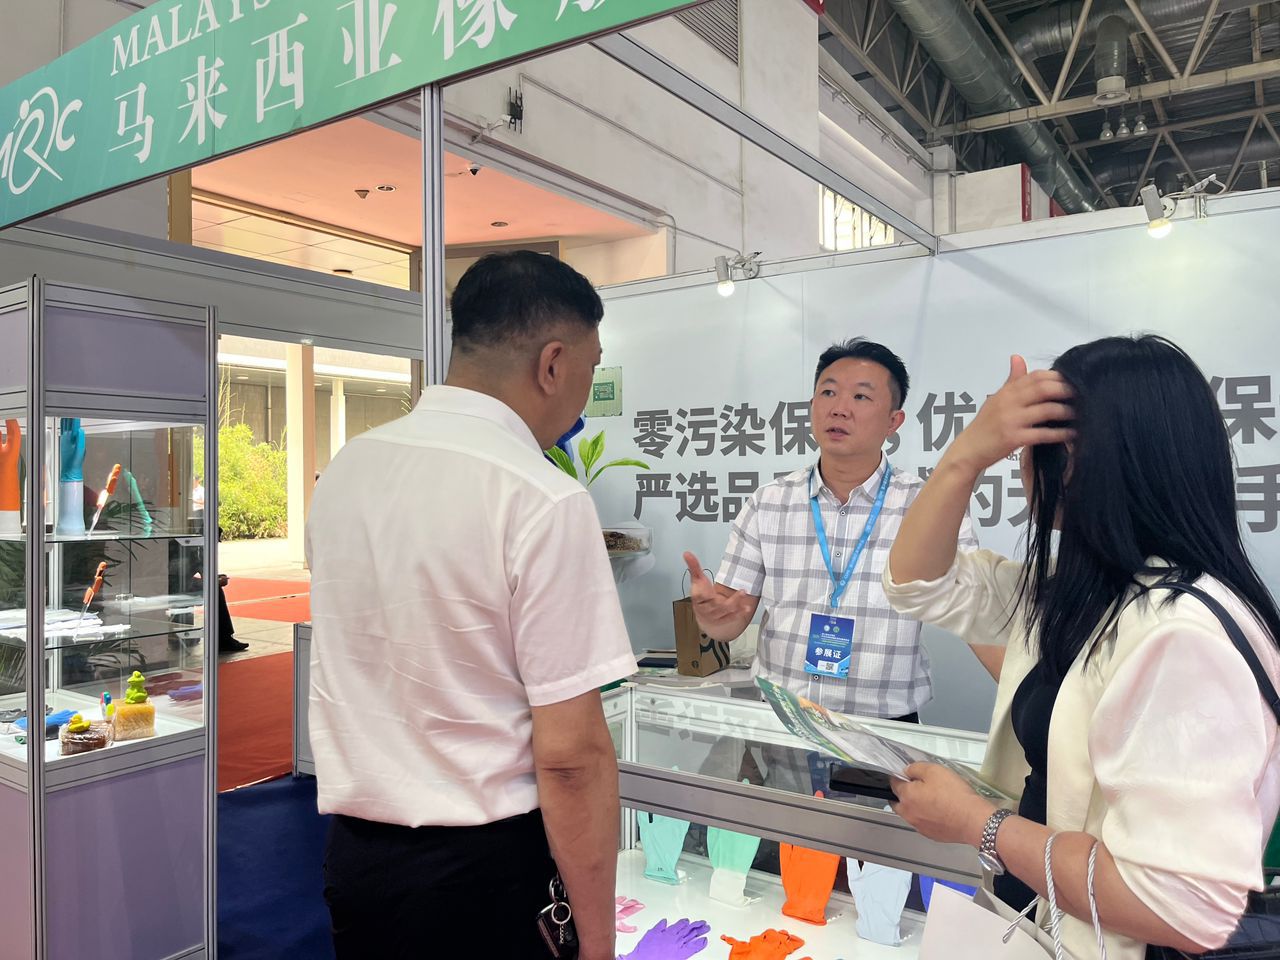 MRC at the Beijing International Clean Technology and Equipment Exhibition (CLEANTAE)